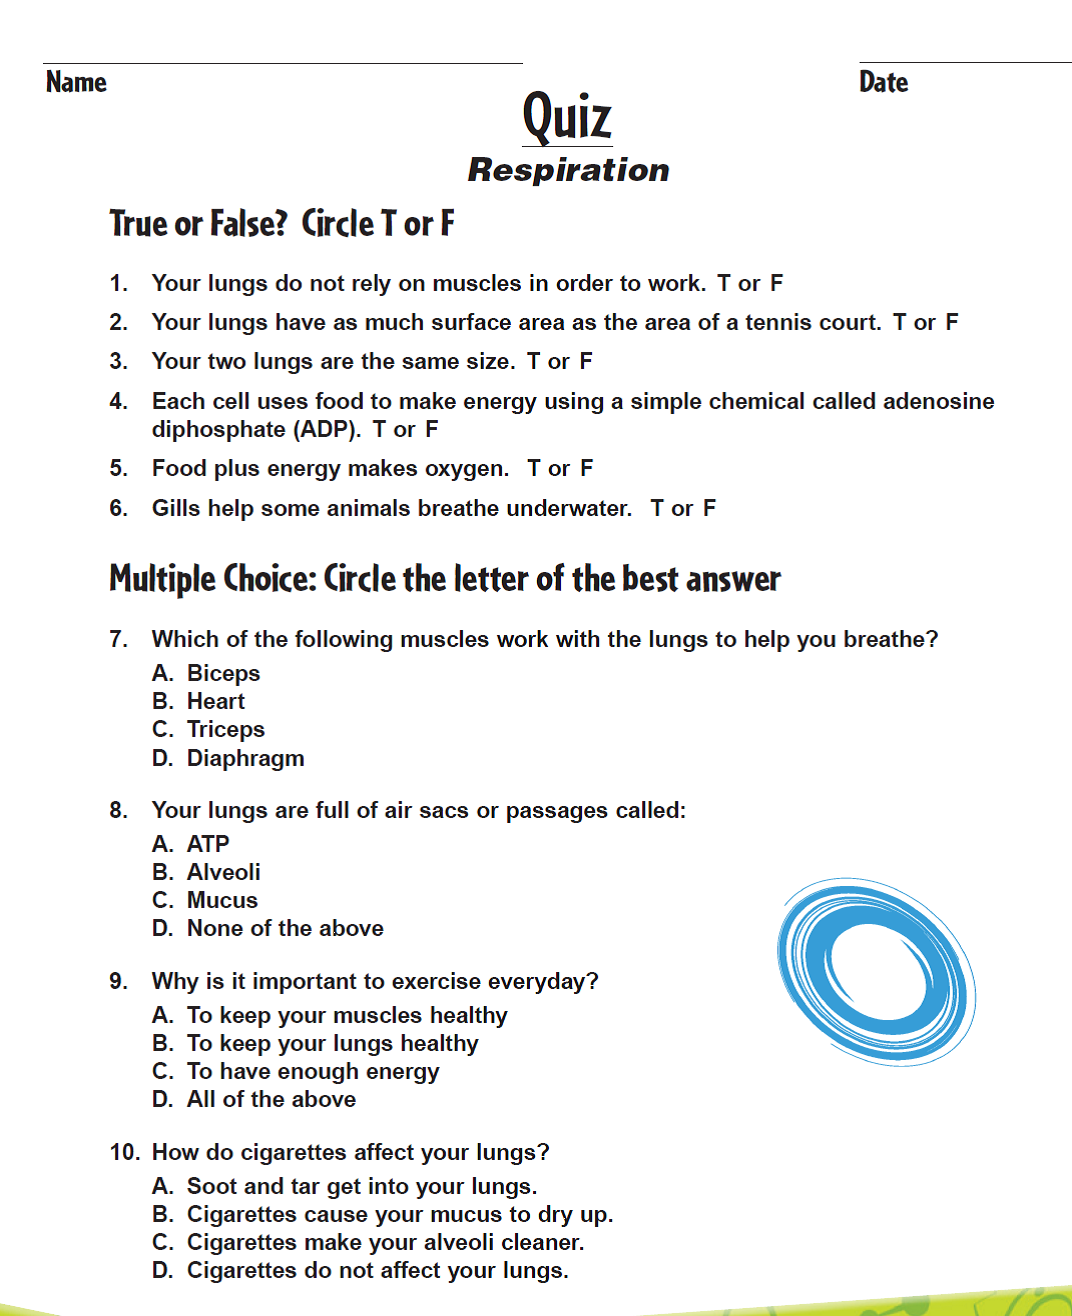 Bill Nye Nutrition Video Worksheet Answers - Nidecmege For Bill Nye Motion Worksheet Answers